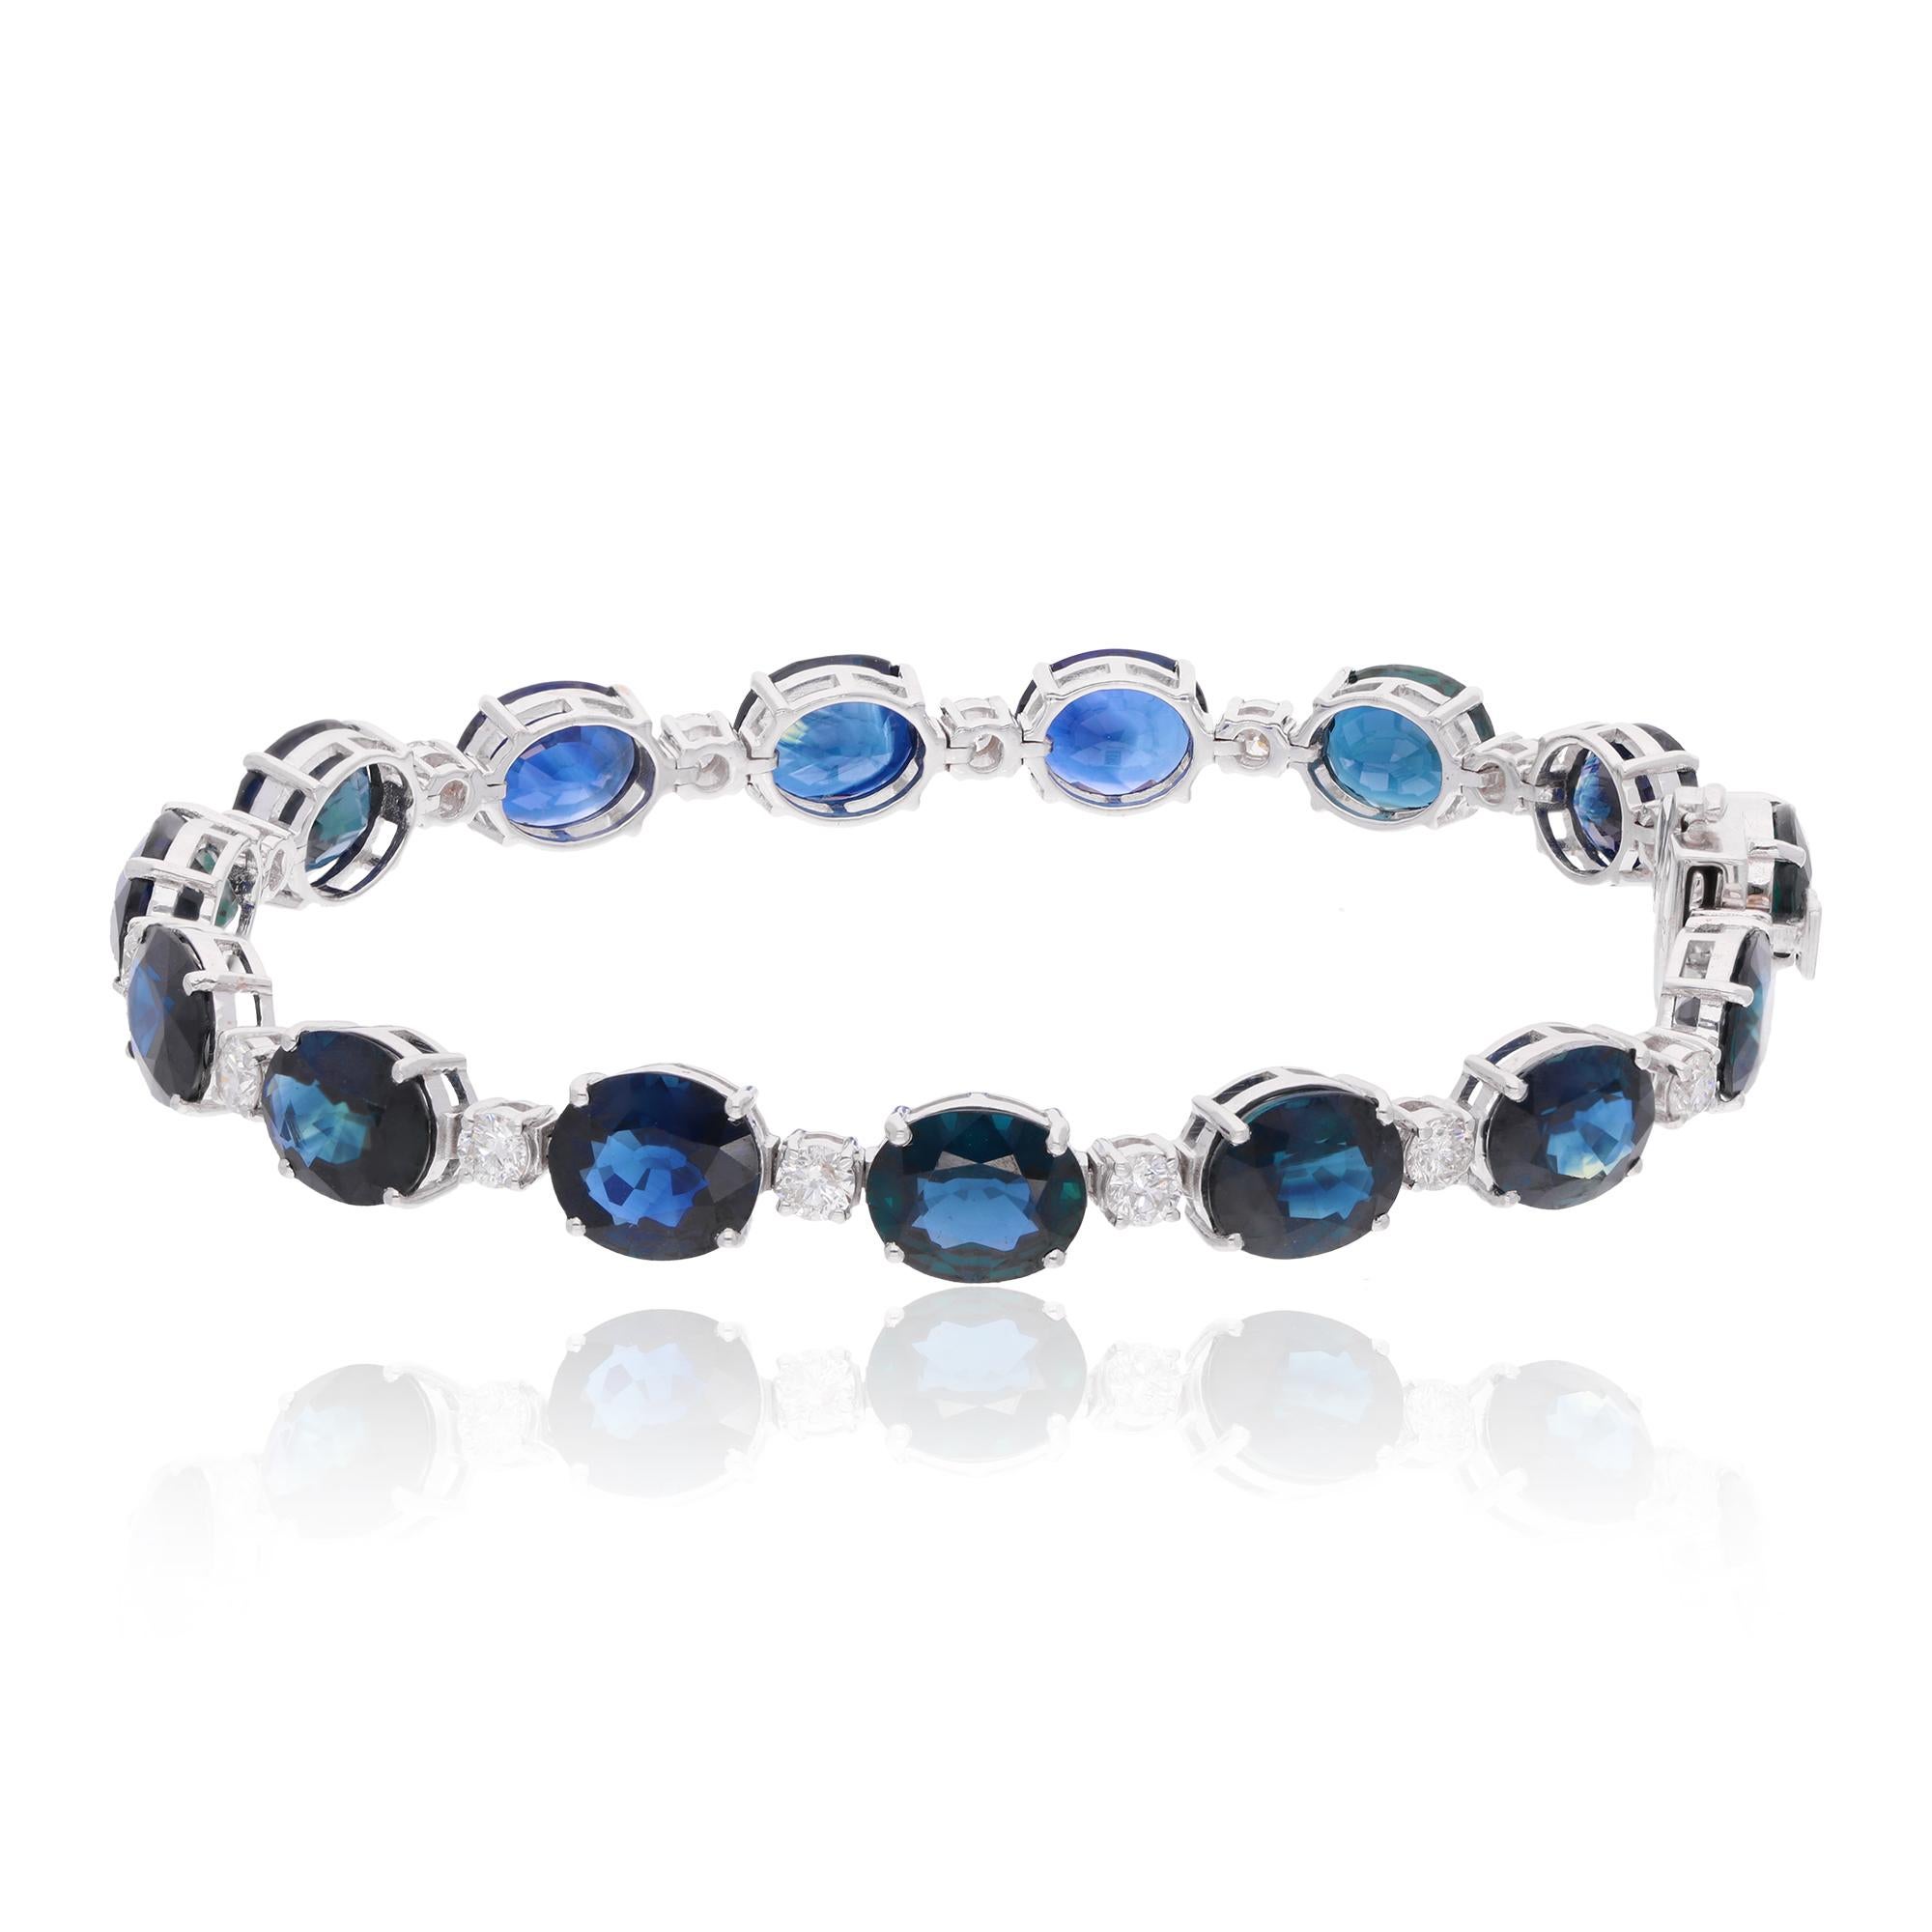 This Dainty Diamond Sapphire Bracelet with 1.51 ct. Genuine Diamonds & 26.49 ct. Natural Sapphire is a promise of perfection and purity. This Bracelet is set in 18k Solid White Gold. You can choose this bracelet in 10k/14k/18k Rose Gold, Yellow Gold